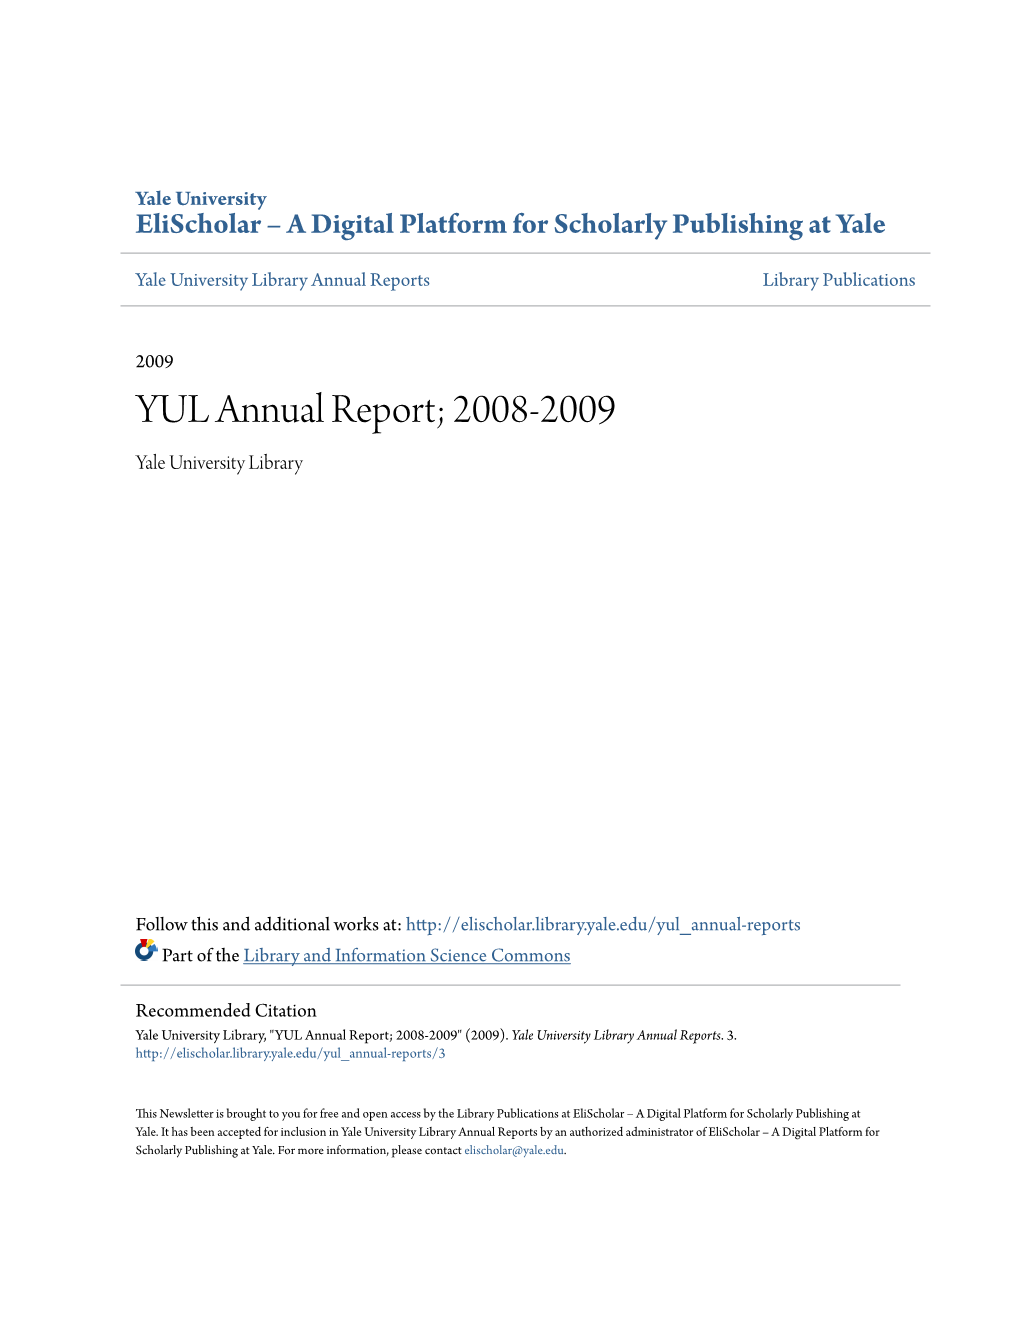 YUL Annual Report; 2008-2009 Yale University Library